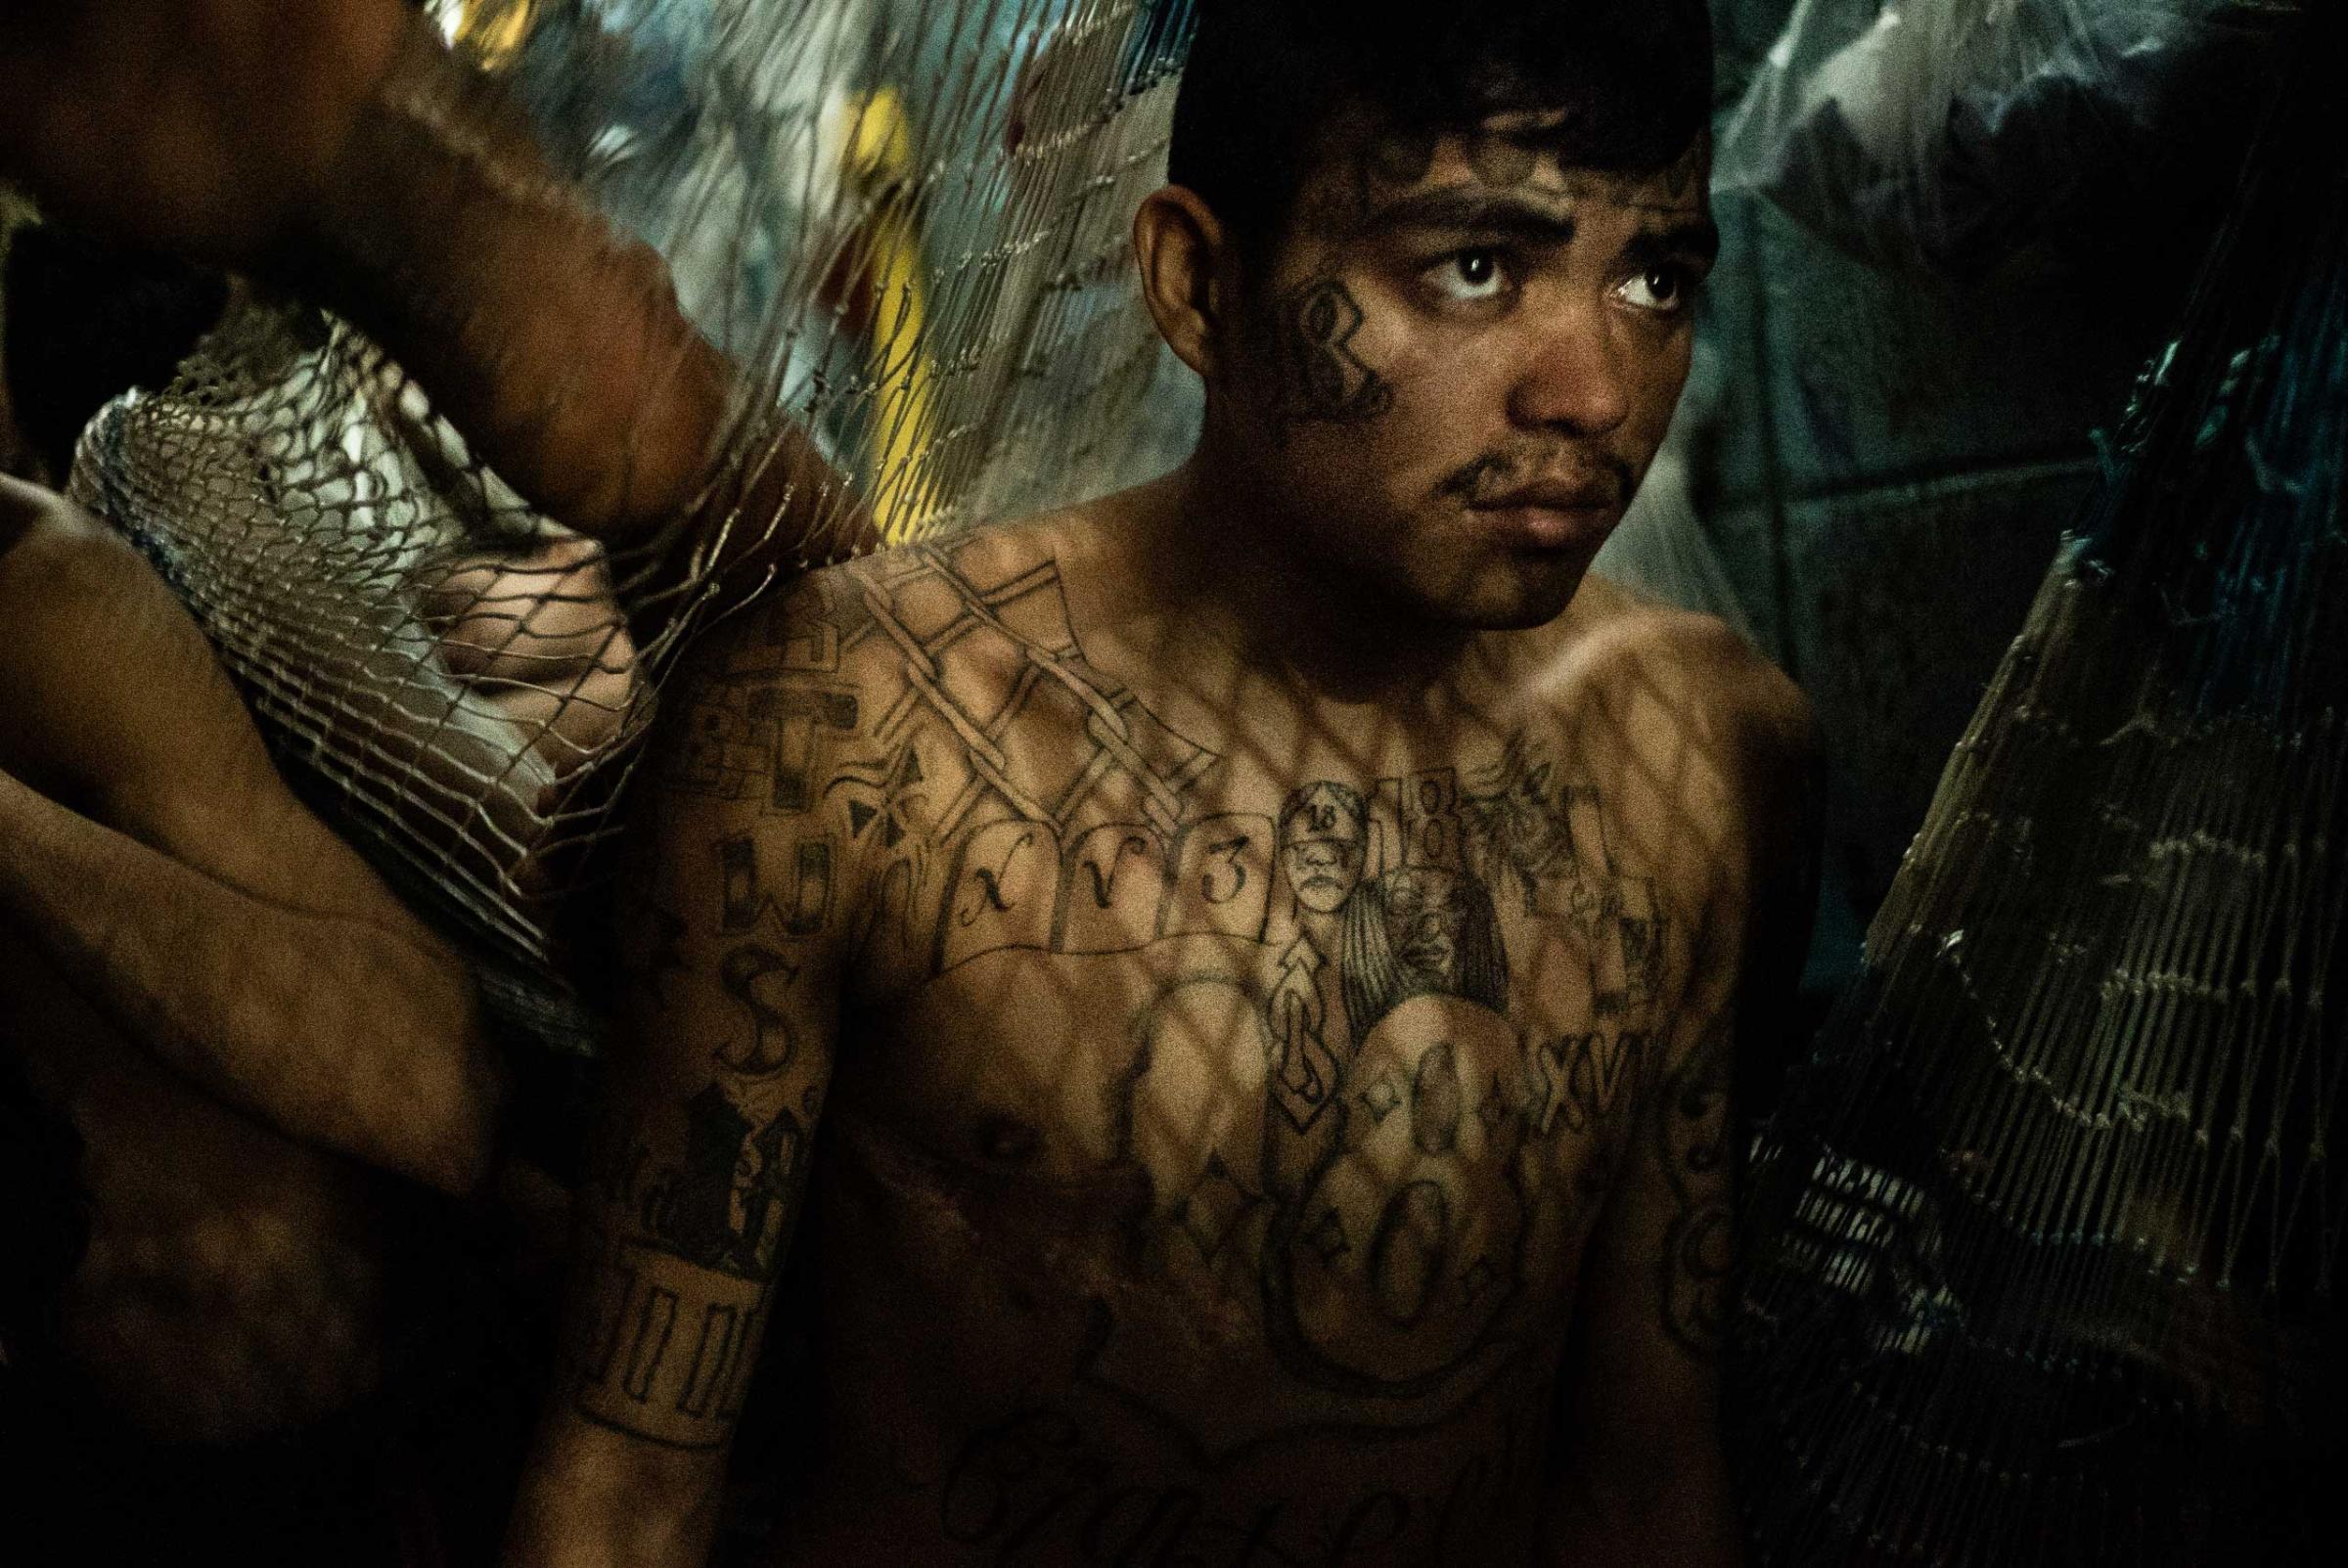 A suspected gang member in a crowded jail in San Salvador, on June 11, 2015.